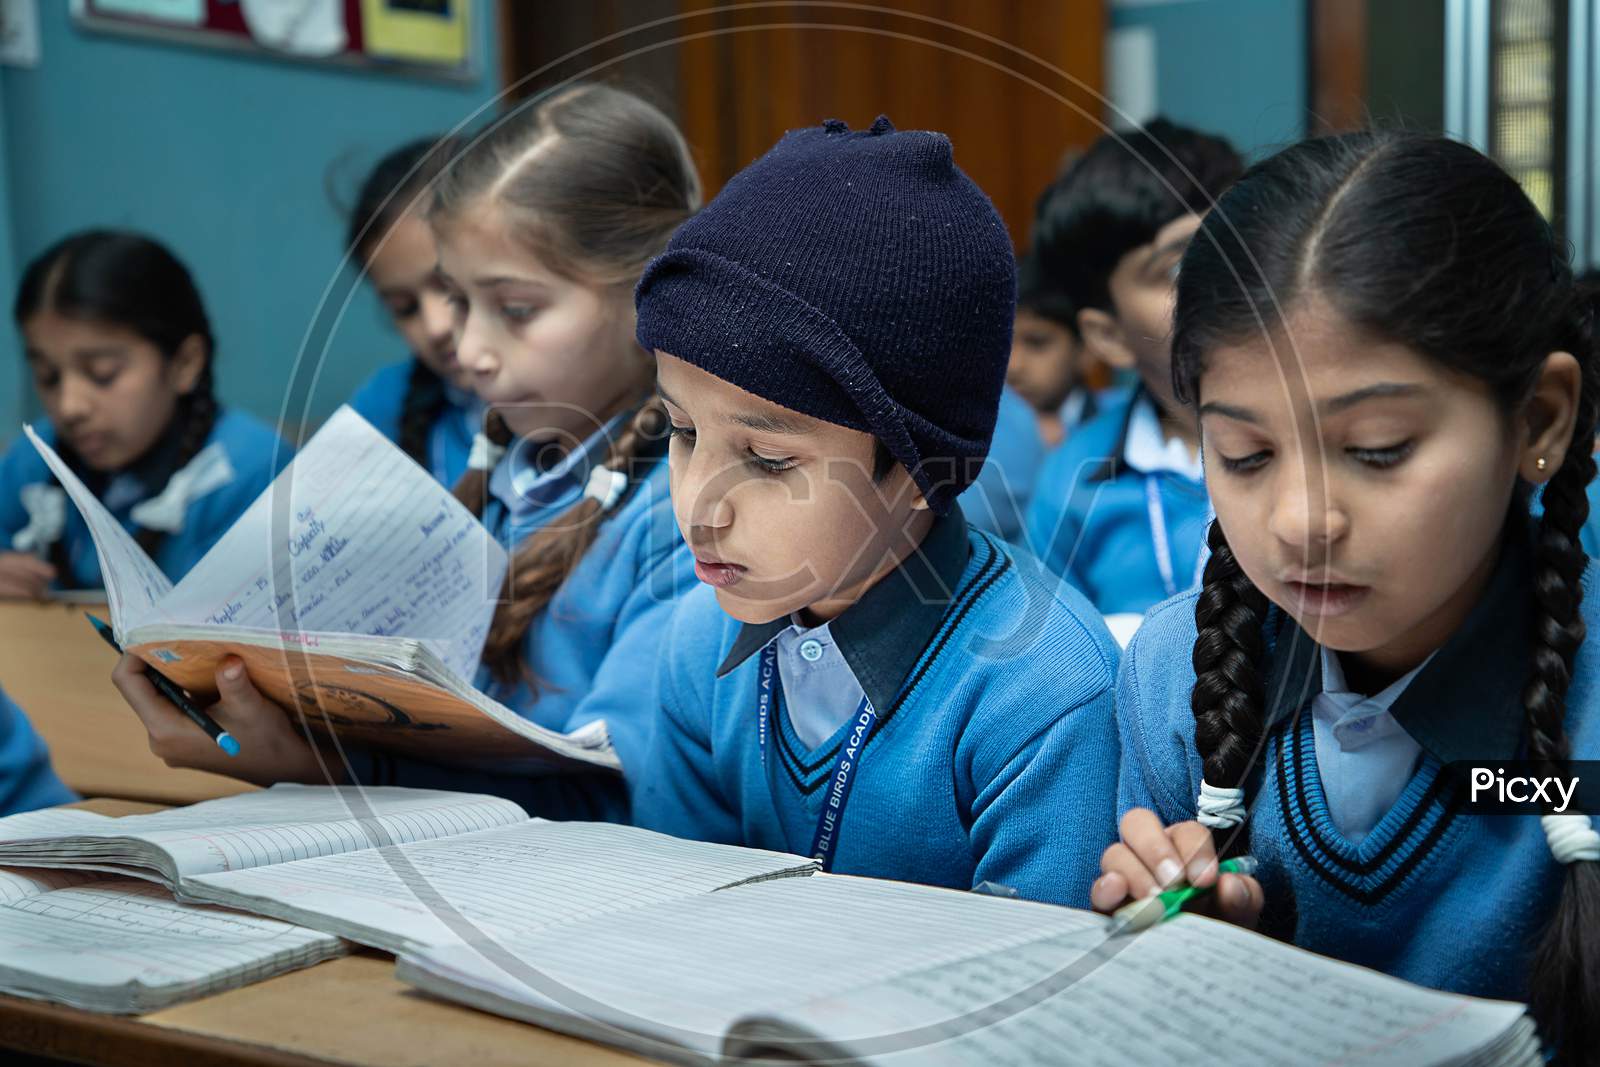 Jodhpur, Rajasthan, India - Jan 10Th 2020: Primary Indian Students Studying In The Classroom Taking Exam / Test Writing In Notebooks. Education Concept.